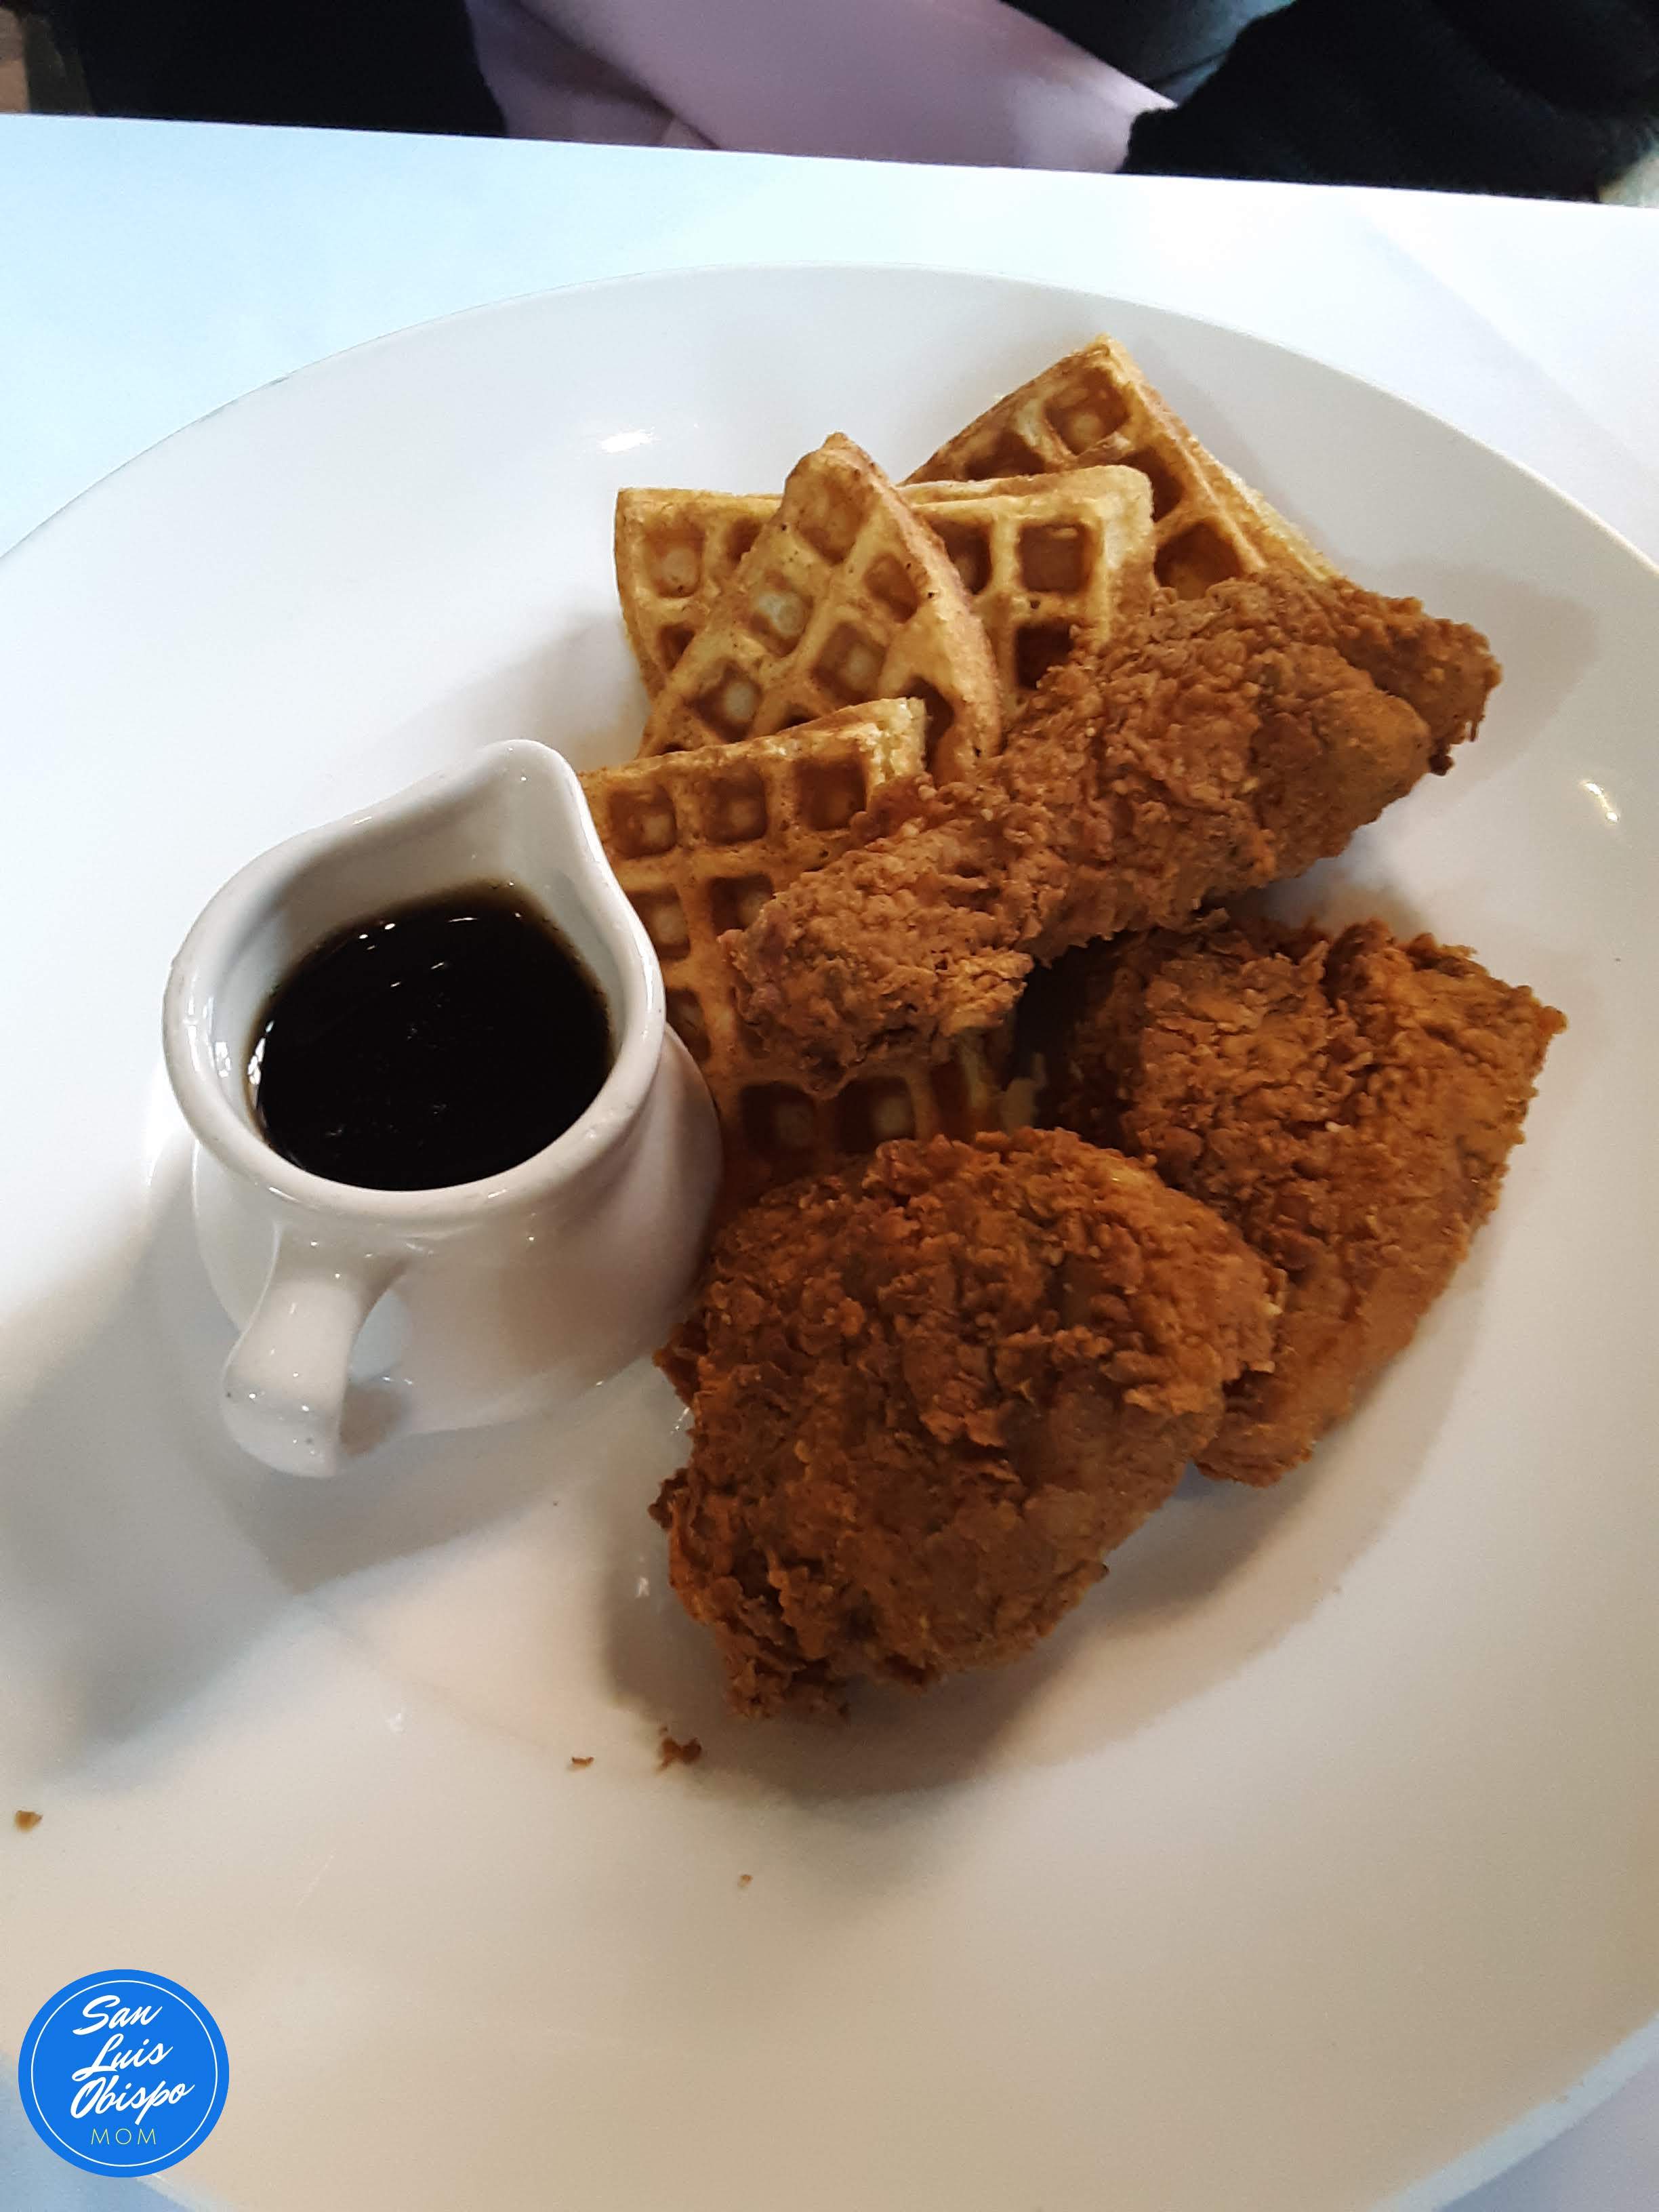 Chicken and Waffles from The Gardens of Avila